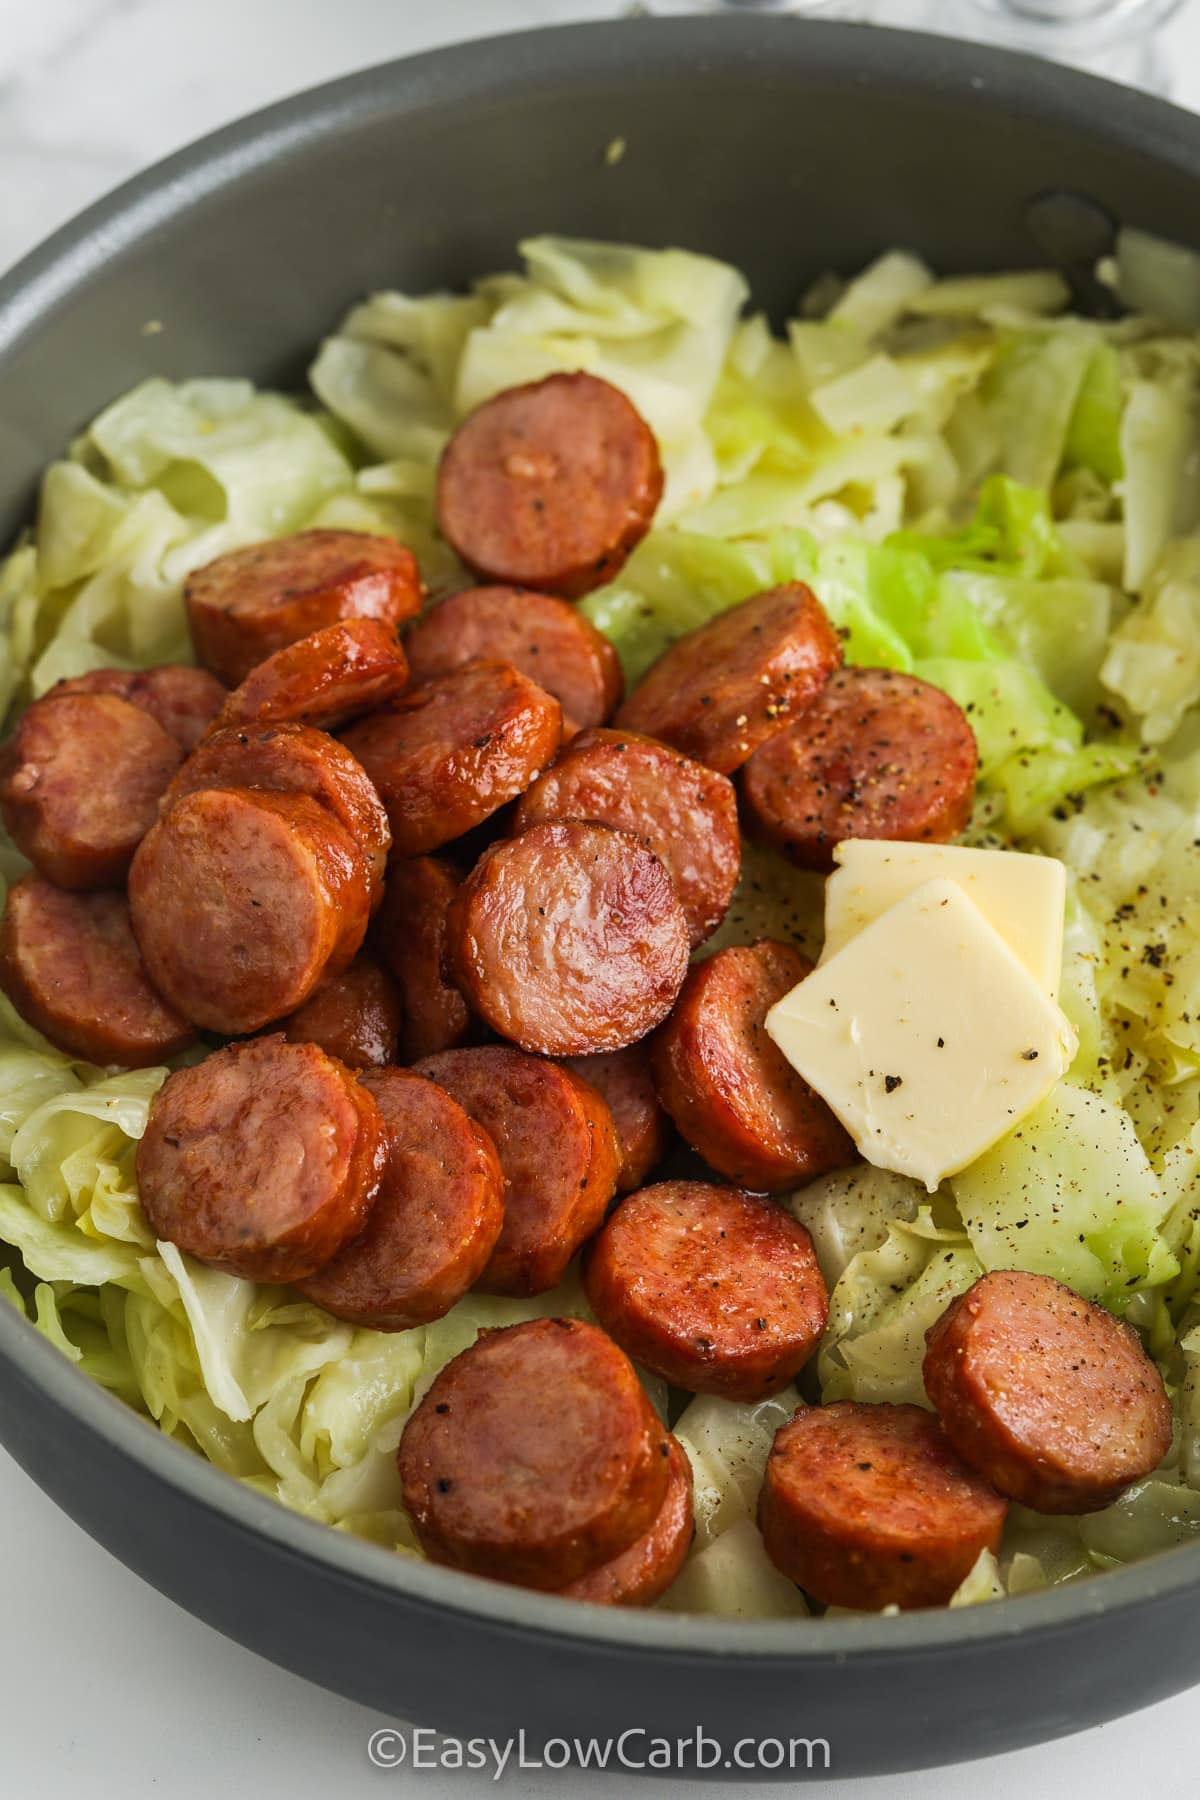 Fried Cabbage and Sausage in a skillet before being mixed.